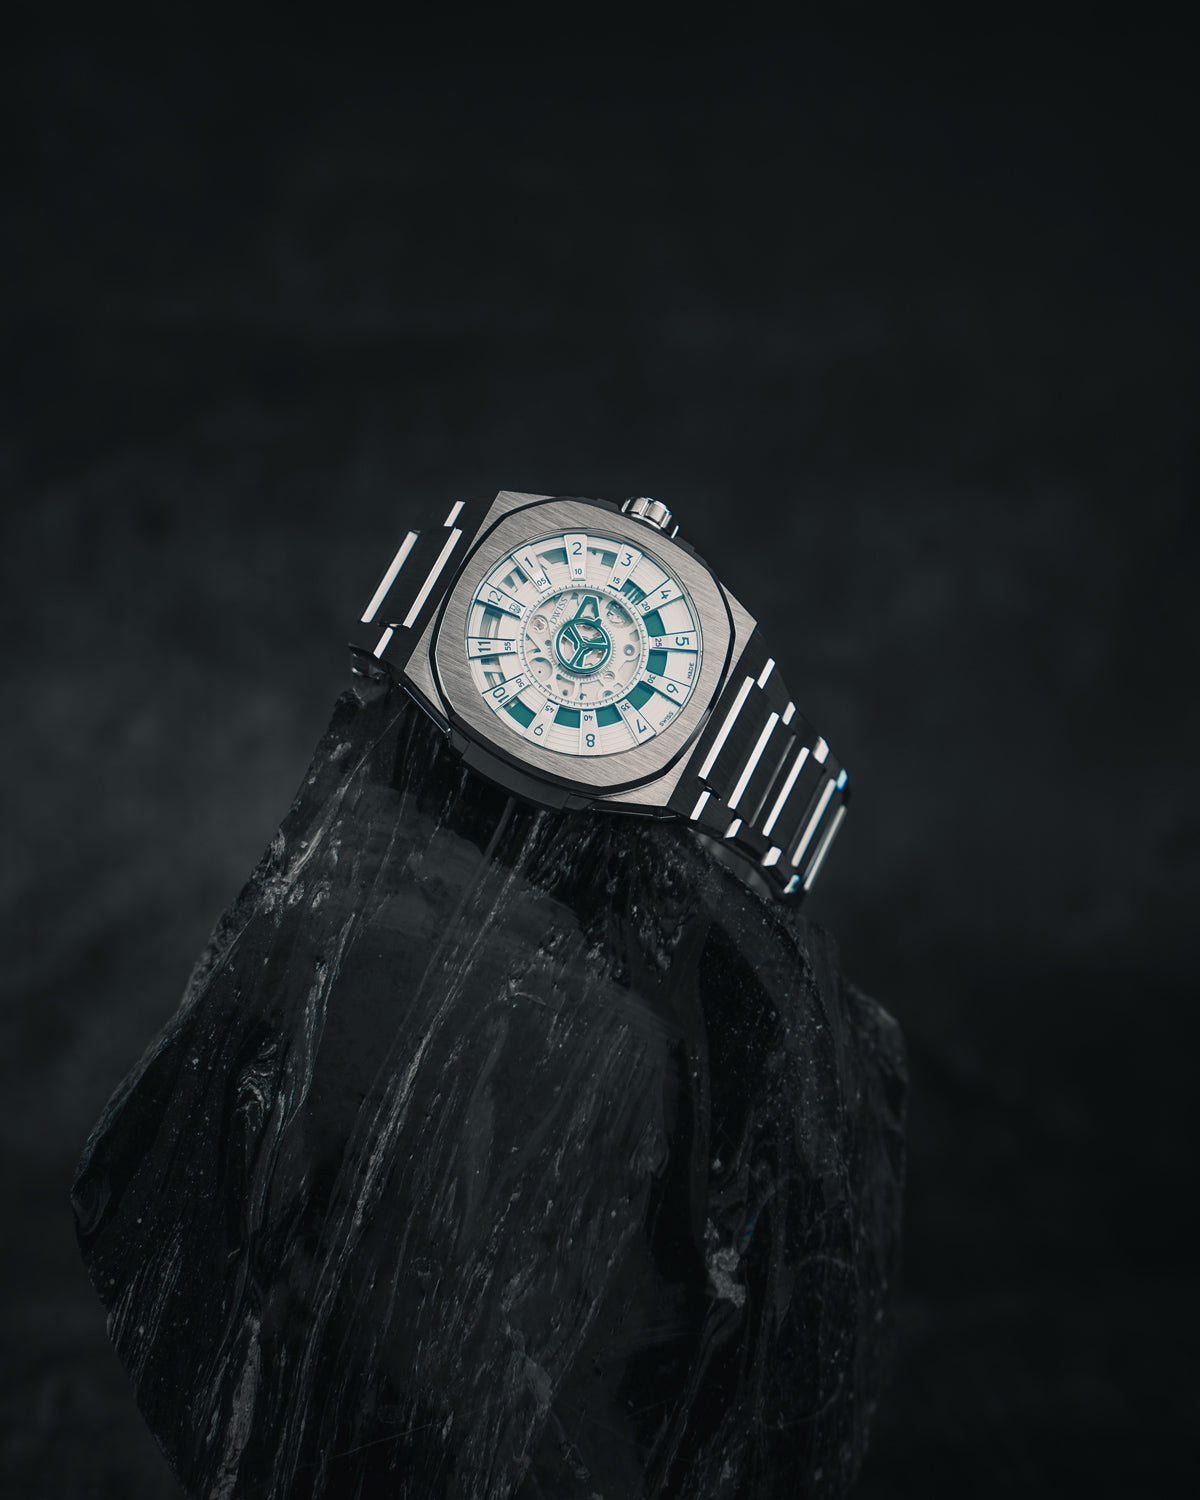 DWISS M3S blue - metal bracelet, swiss made design awarded watch with DWISS signature mysterious hours time display and sapphire crystal